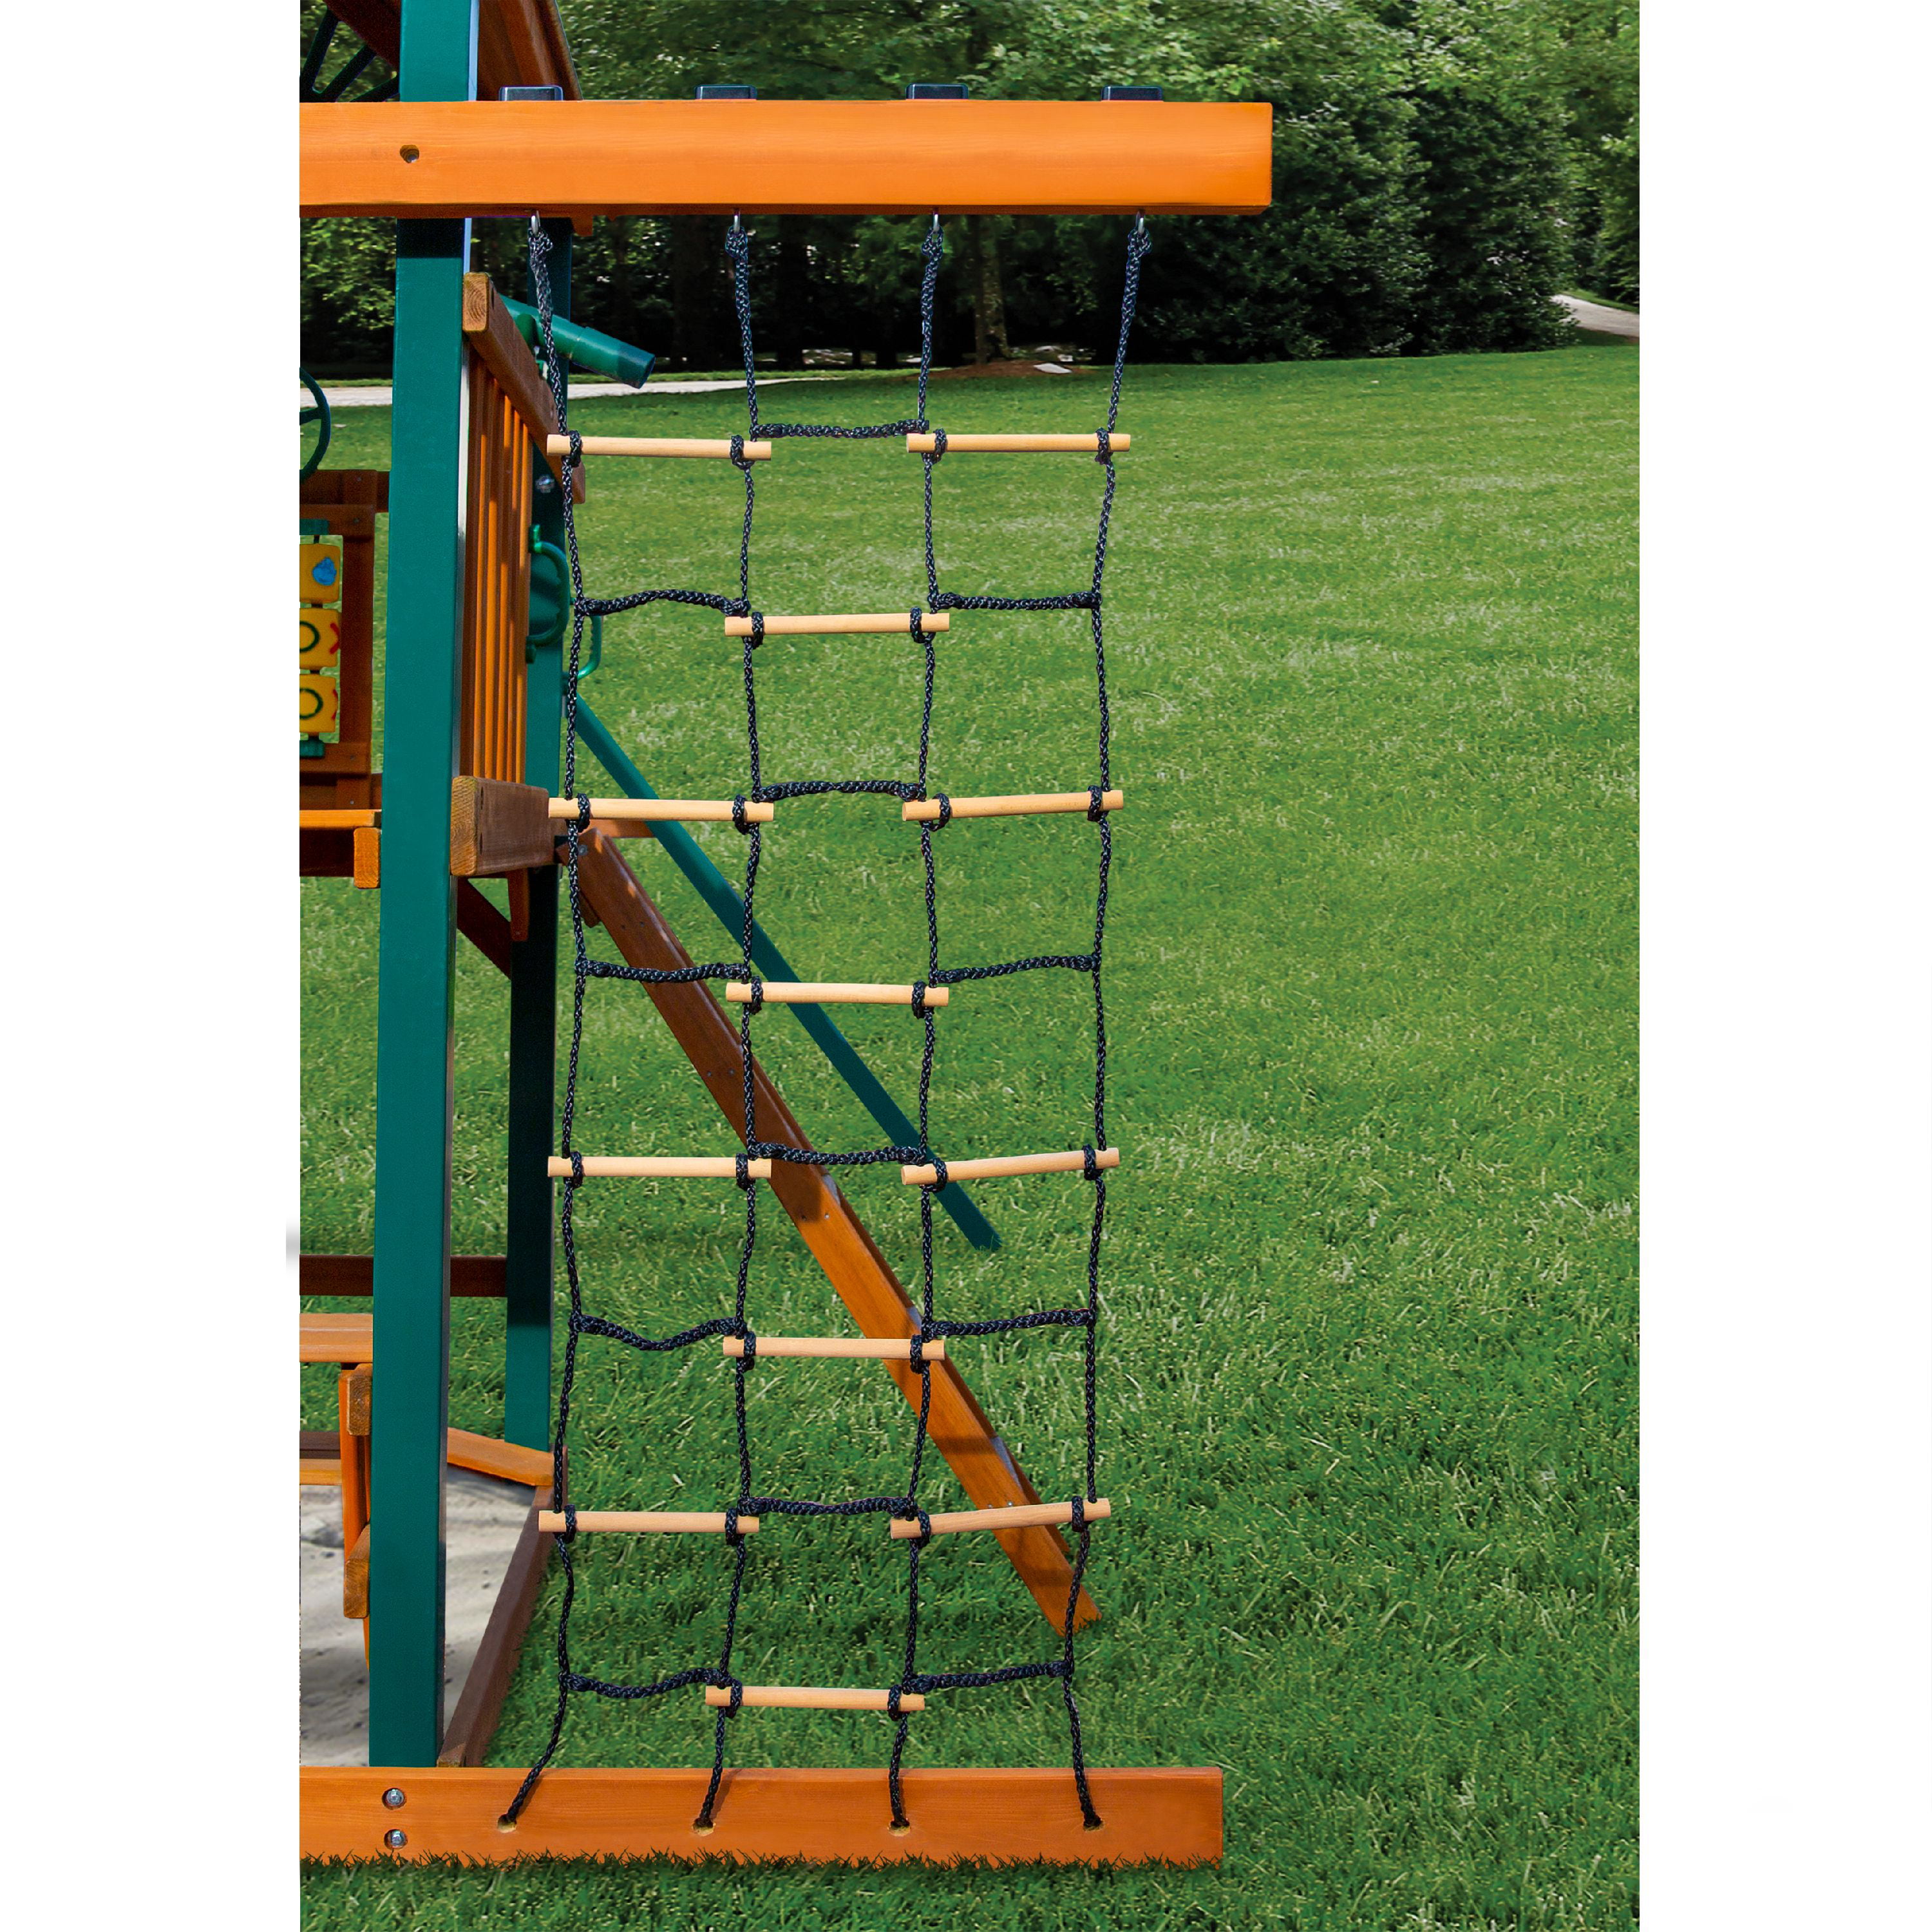 Classic Leisure Products Residential Polyhemp Scramble Net 7ft x 5ft for 